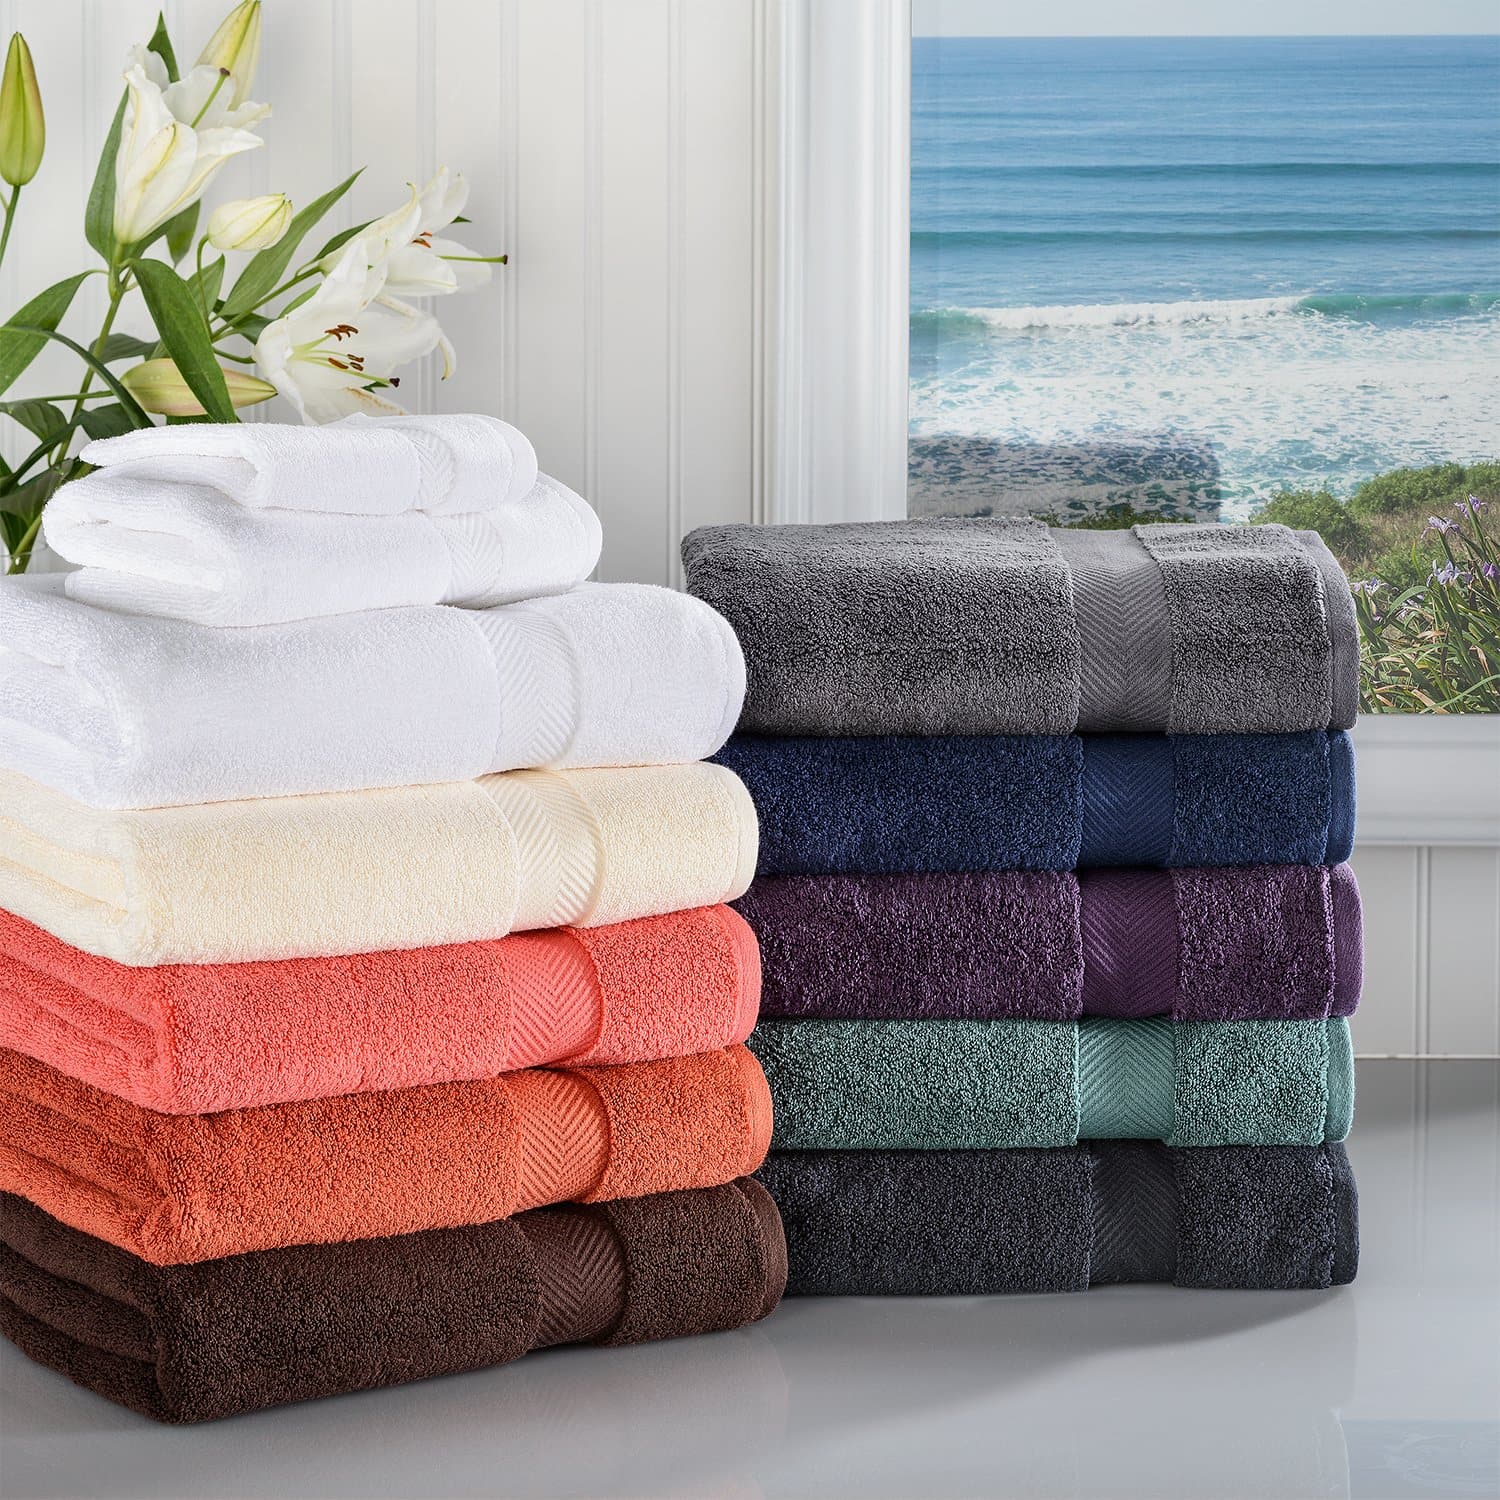 How Many Sheet and Towel Sets Should You Have?